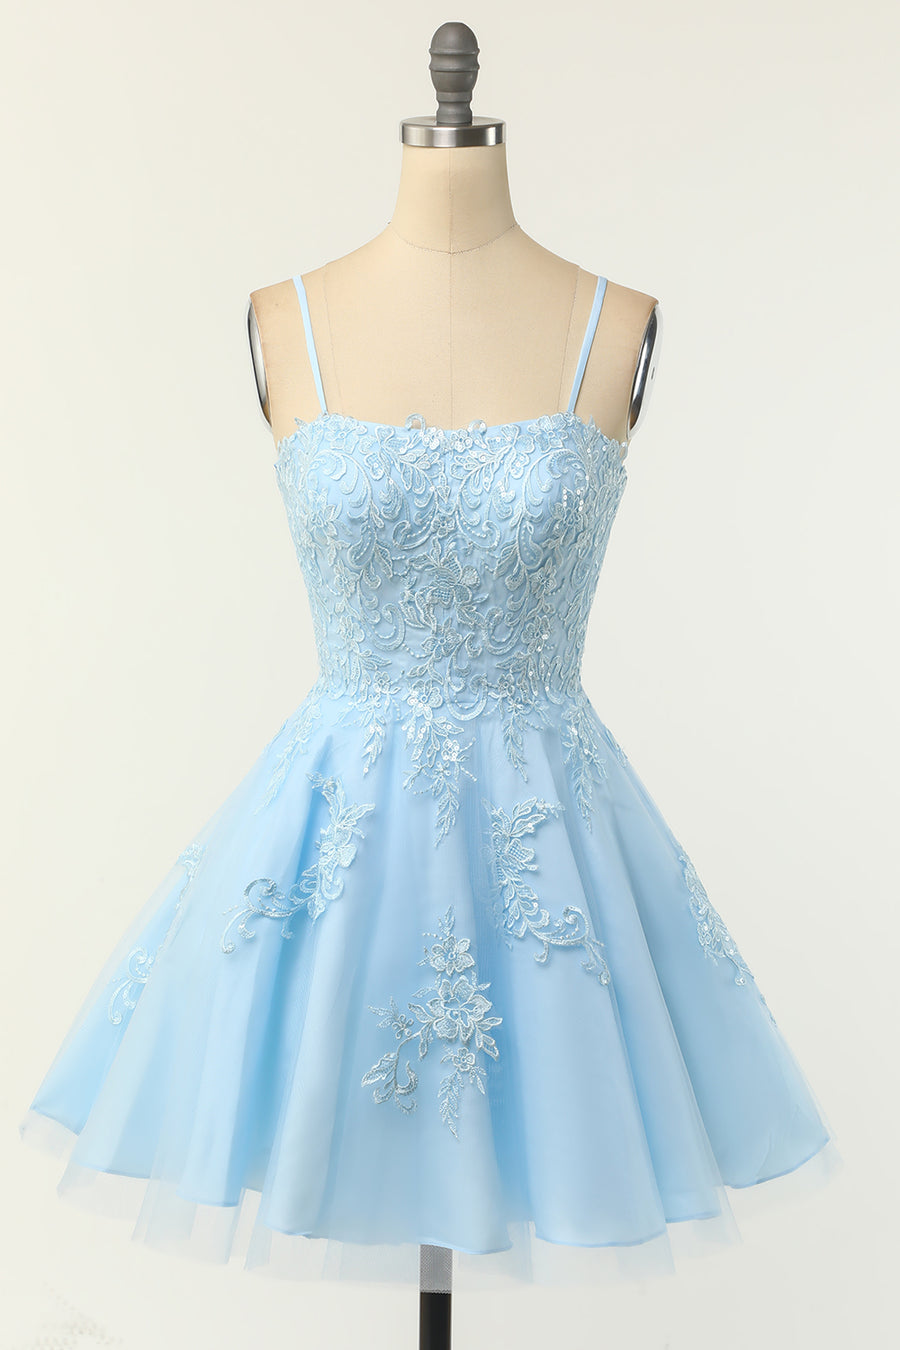 Light Blue Floral Lace A-Line Short Party Dress with Spaghetti Straps